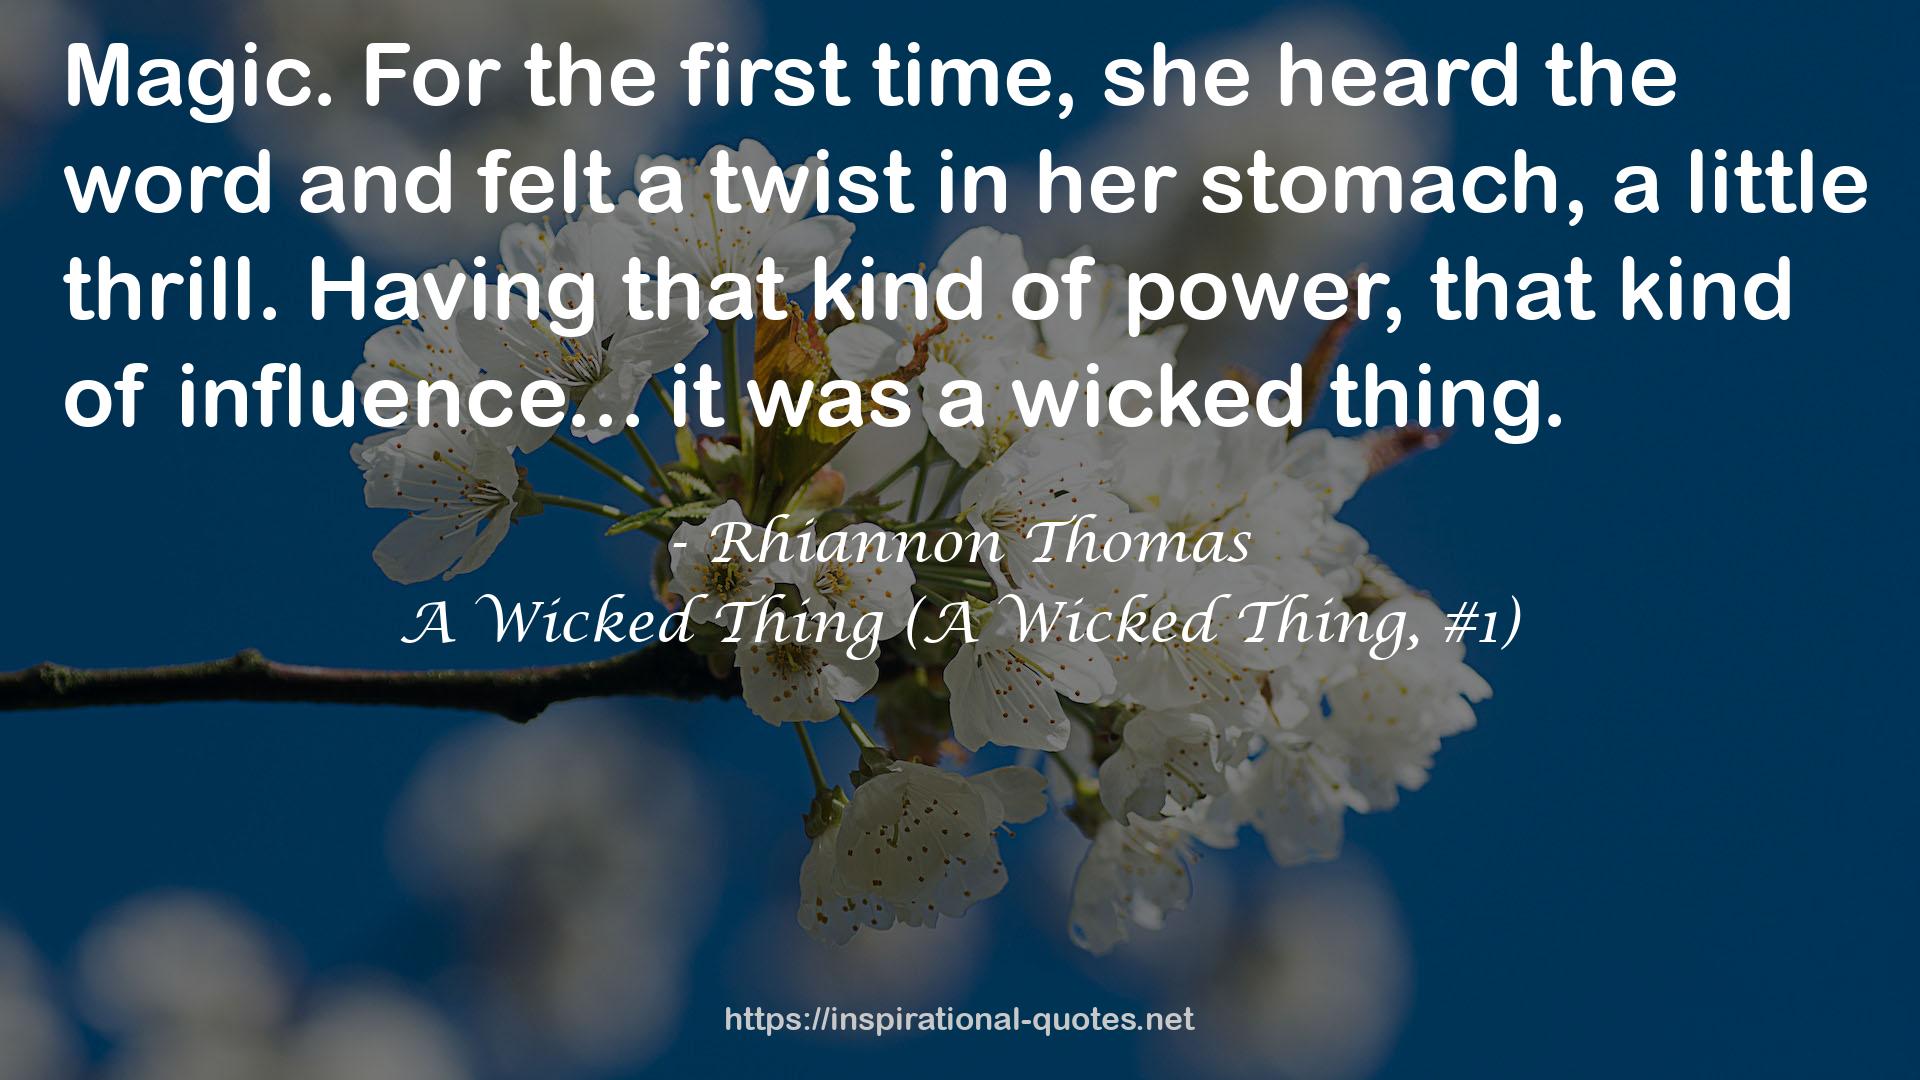 A Wicked Thing (A Wicked Thing, #1) QUOTES